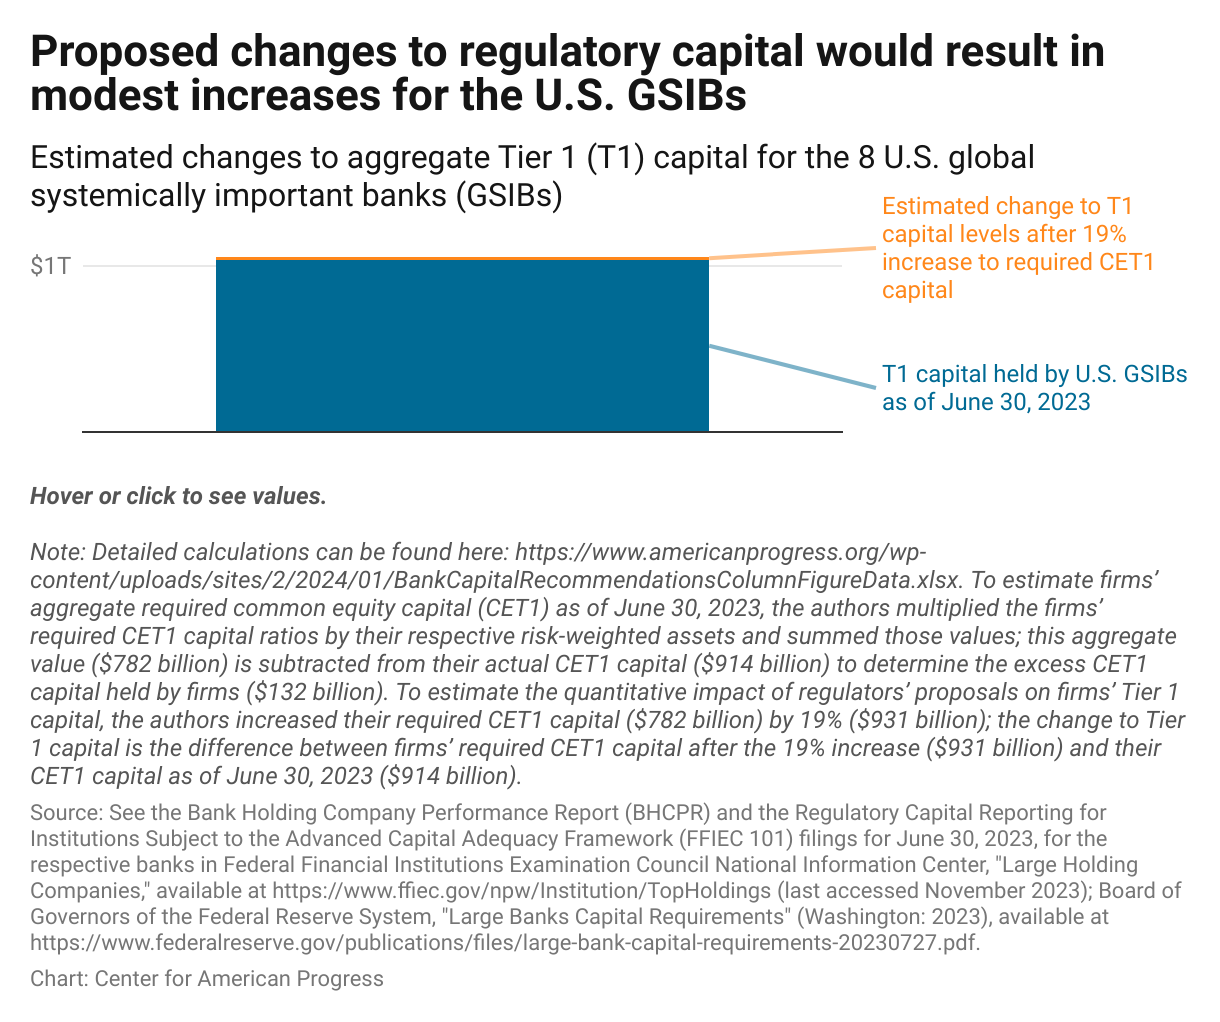 A bar graph showing that the T1 capital held by U.S. GSIBs will increase by only $17 billion under the proposed changes to regulatory capital.